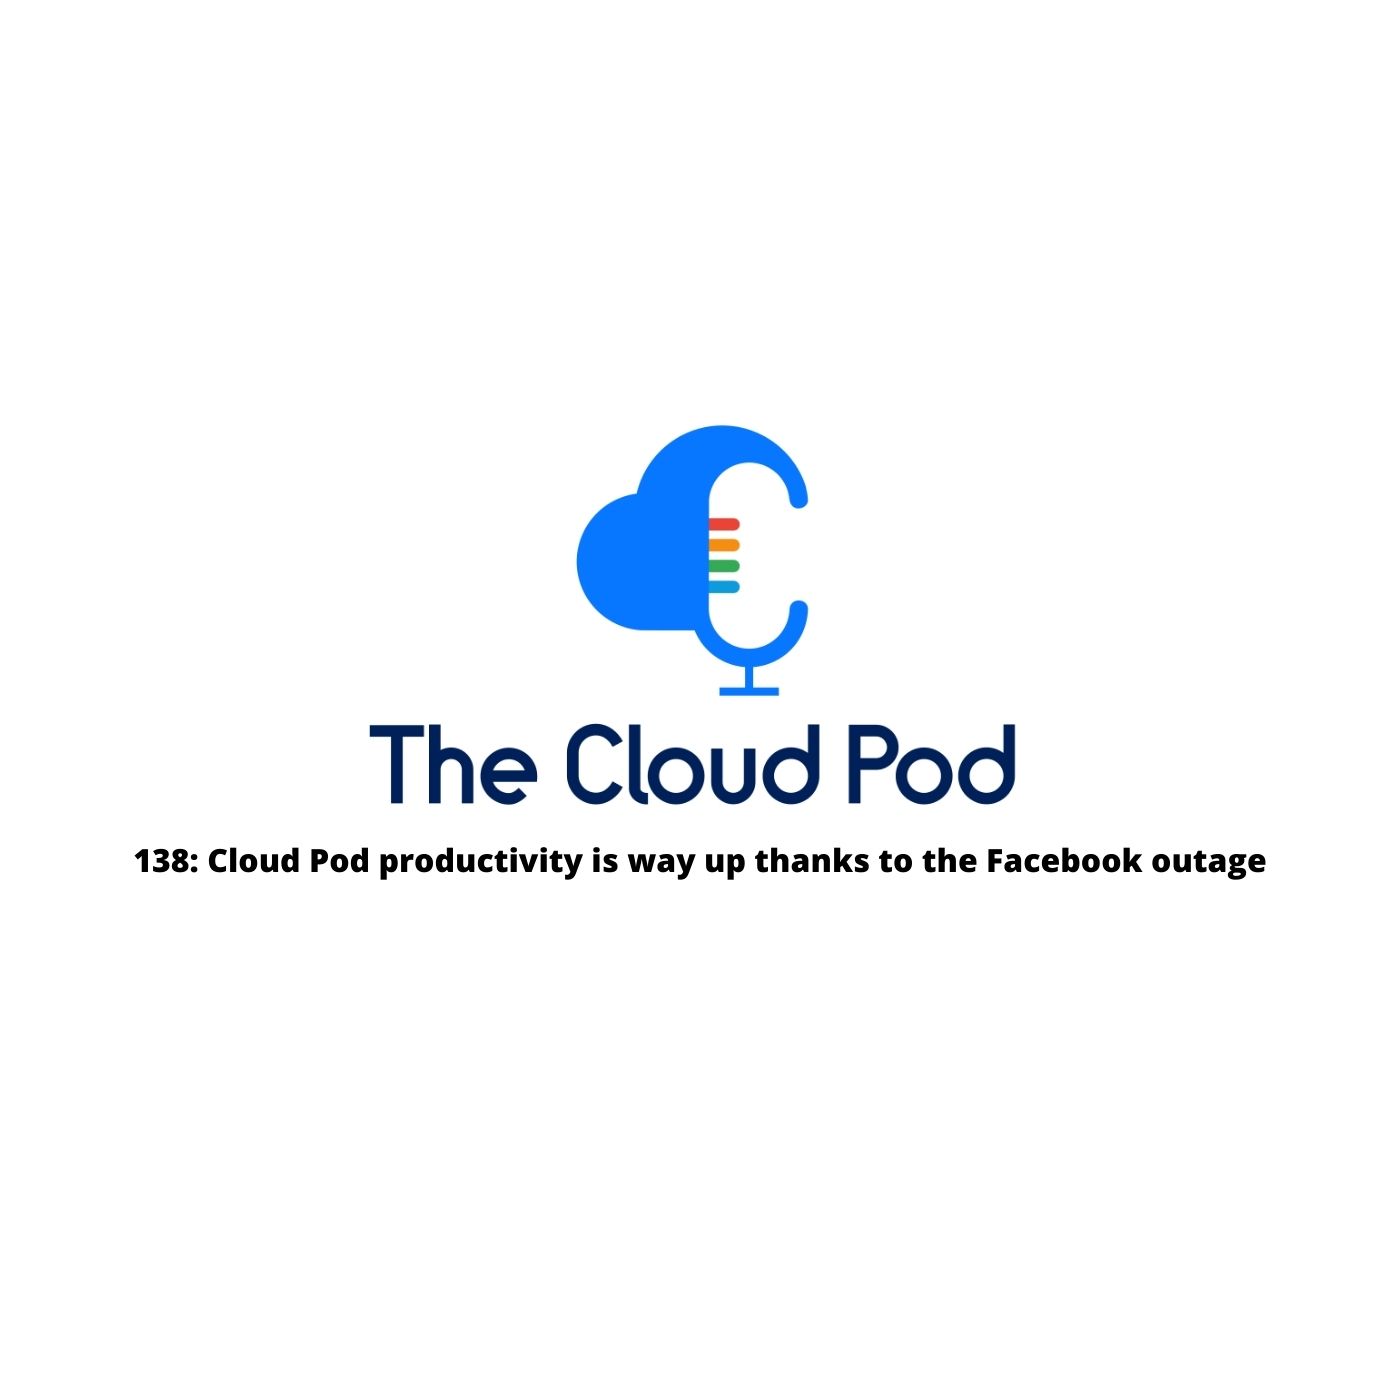 138: Cloud Pod productivity is way up thanks to the Facebook outage